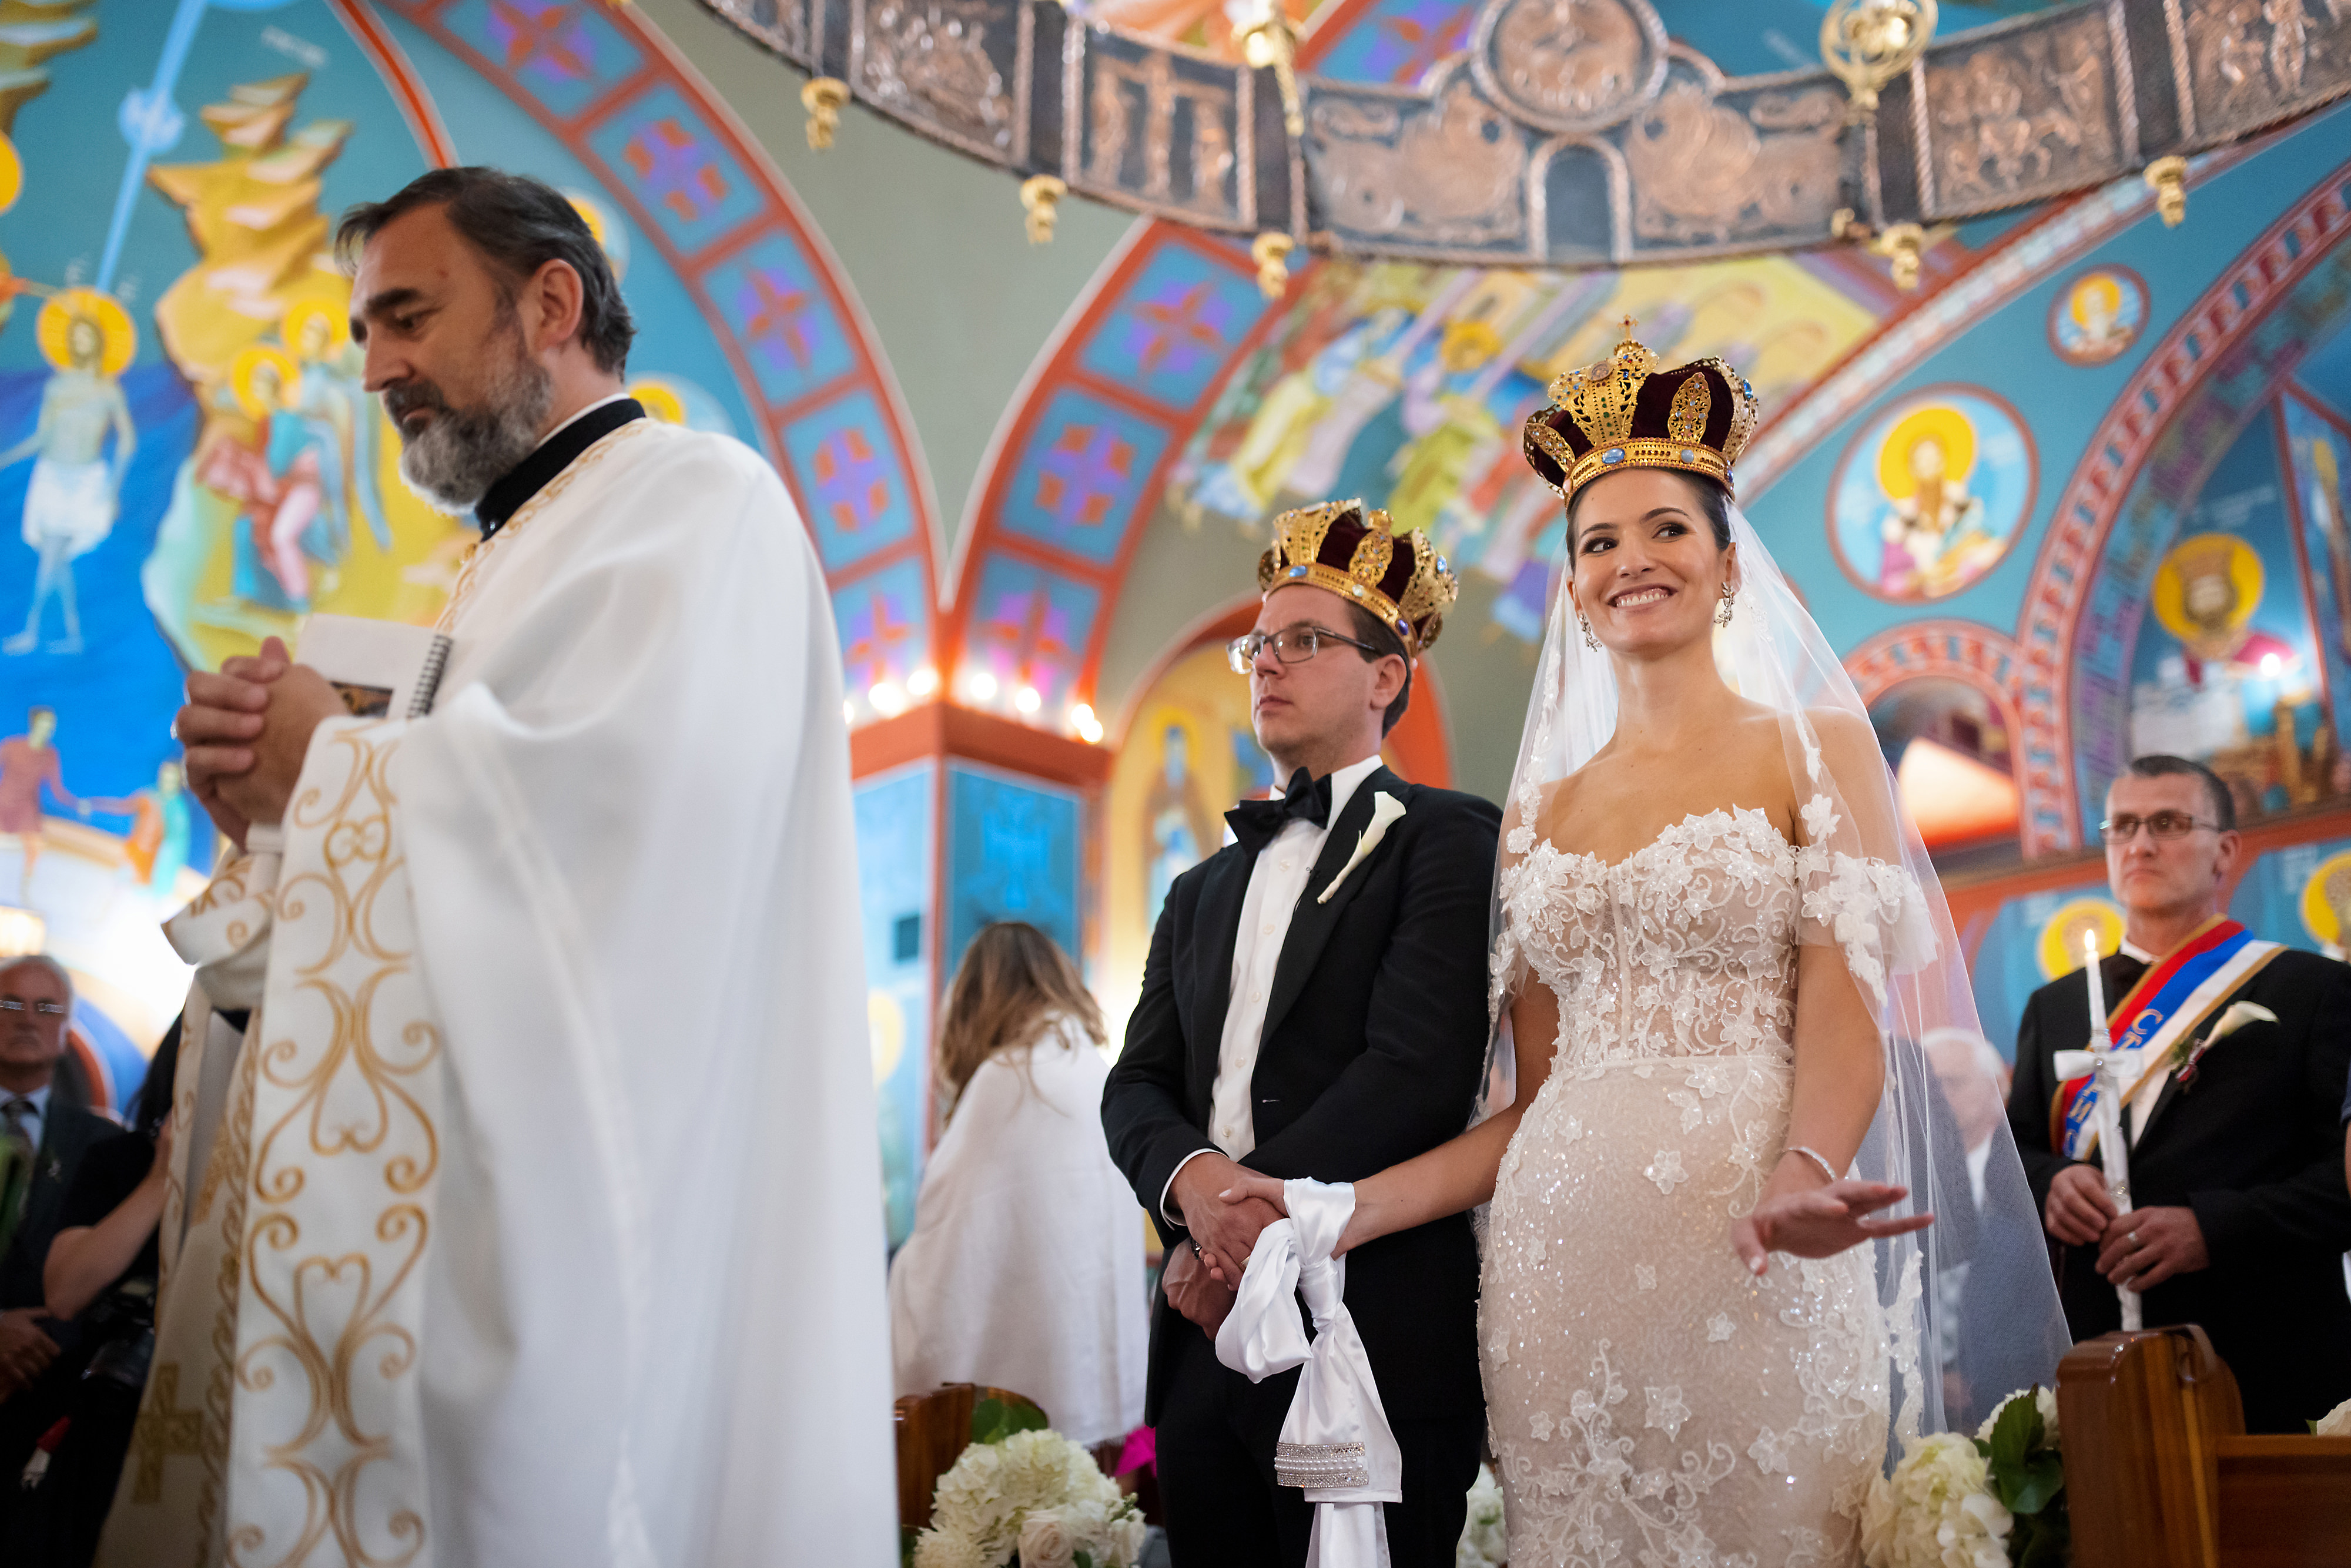 Bride gestures to family during wedding ceremony at George Serbian Orthodox Church